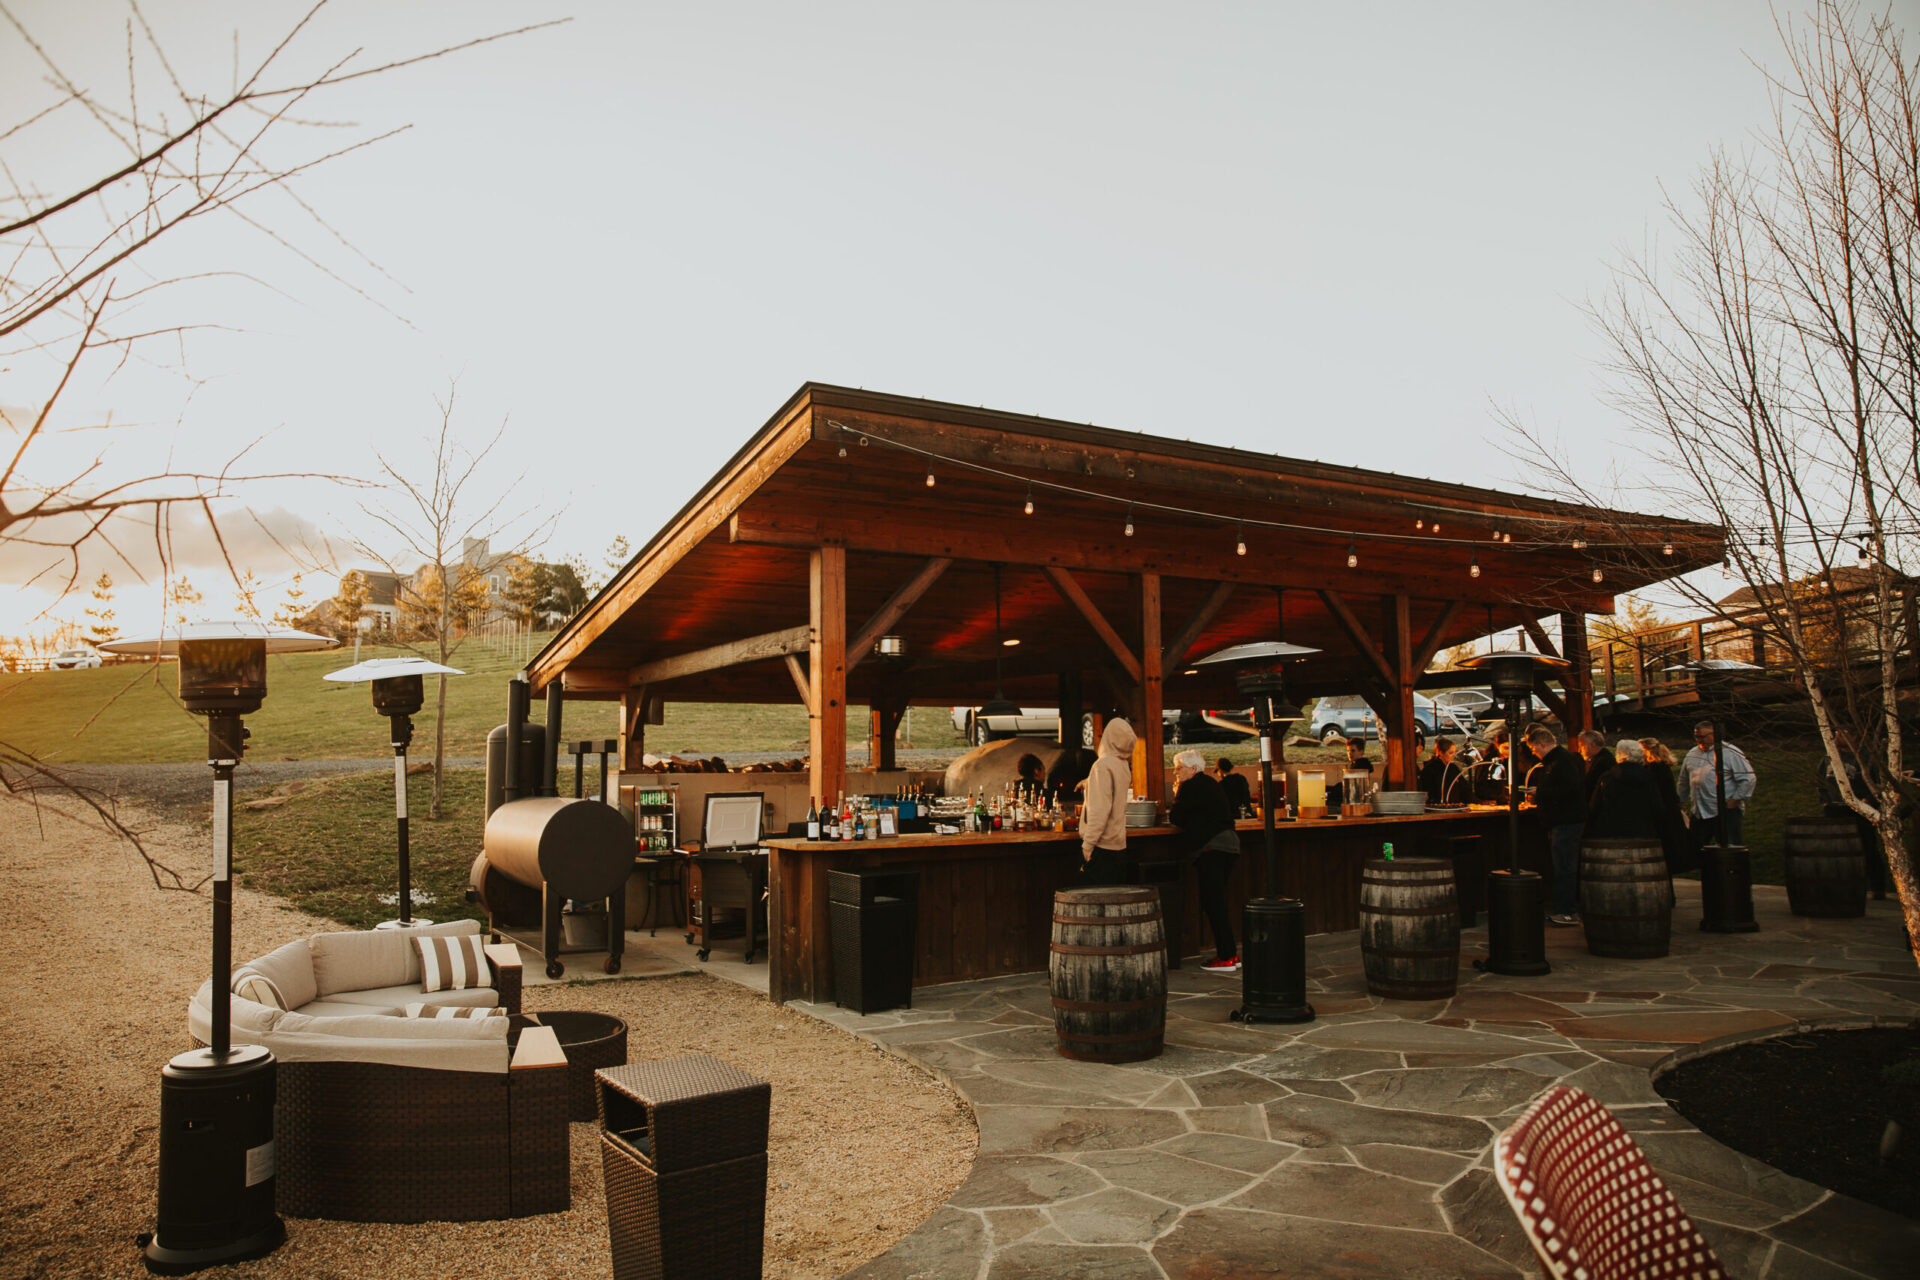 Zion Springs South Terrace cucina rustic barn with barrels and seating area